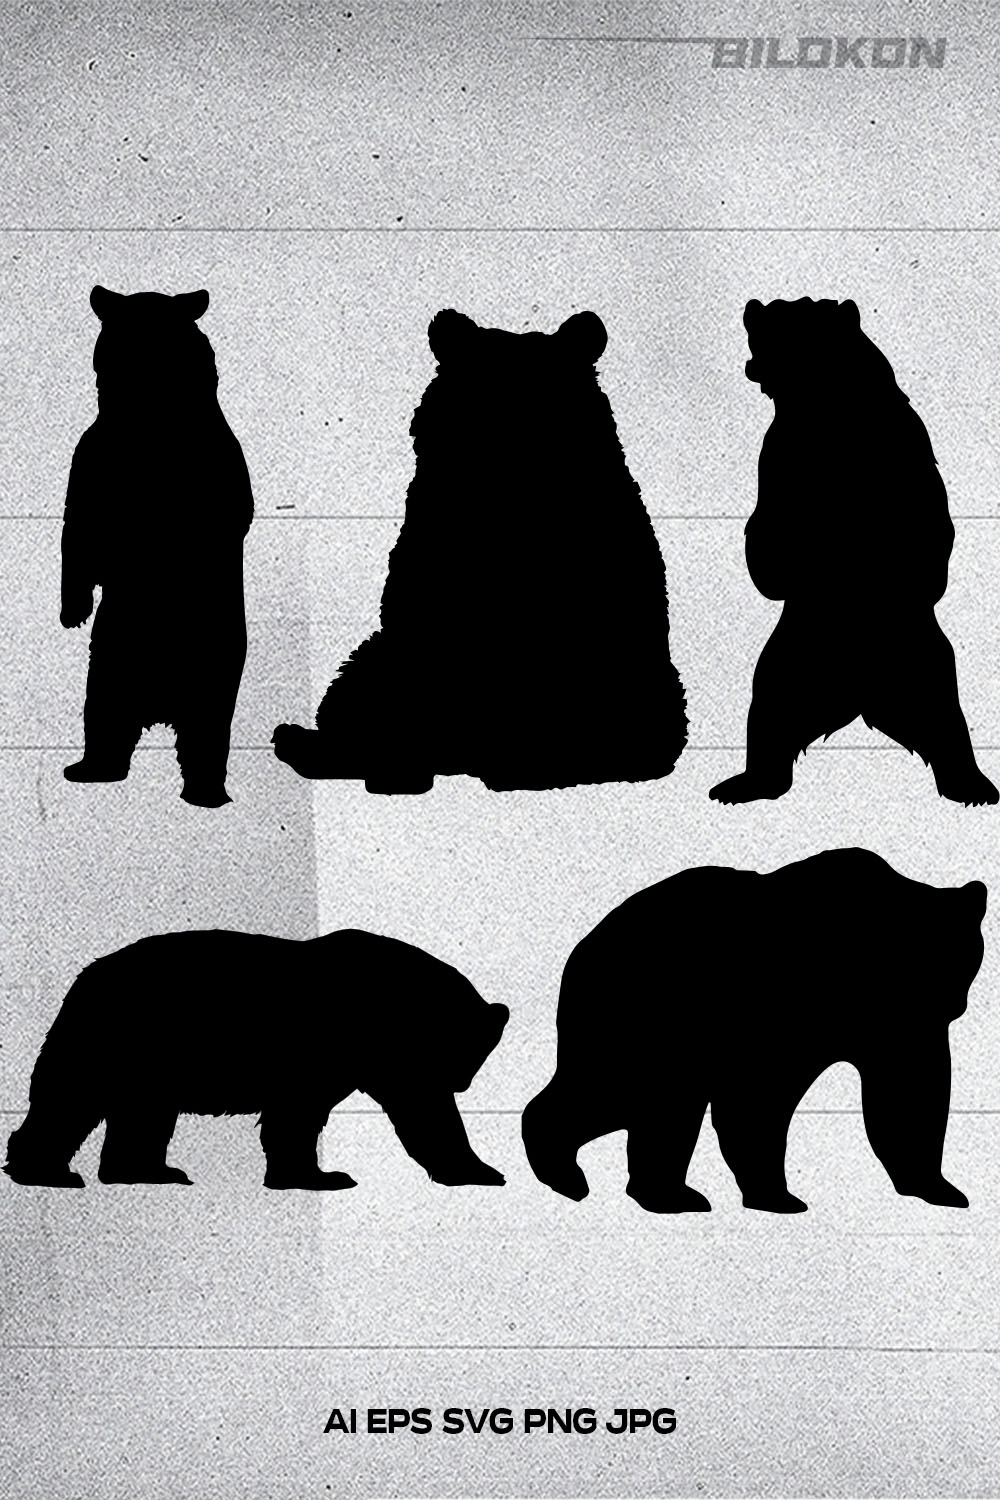 Group of bear silhouettes on a white background.